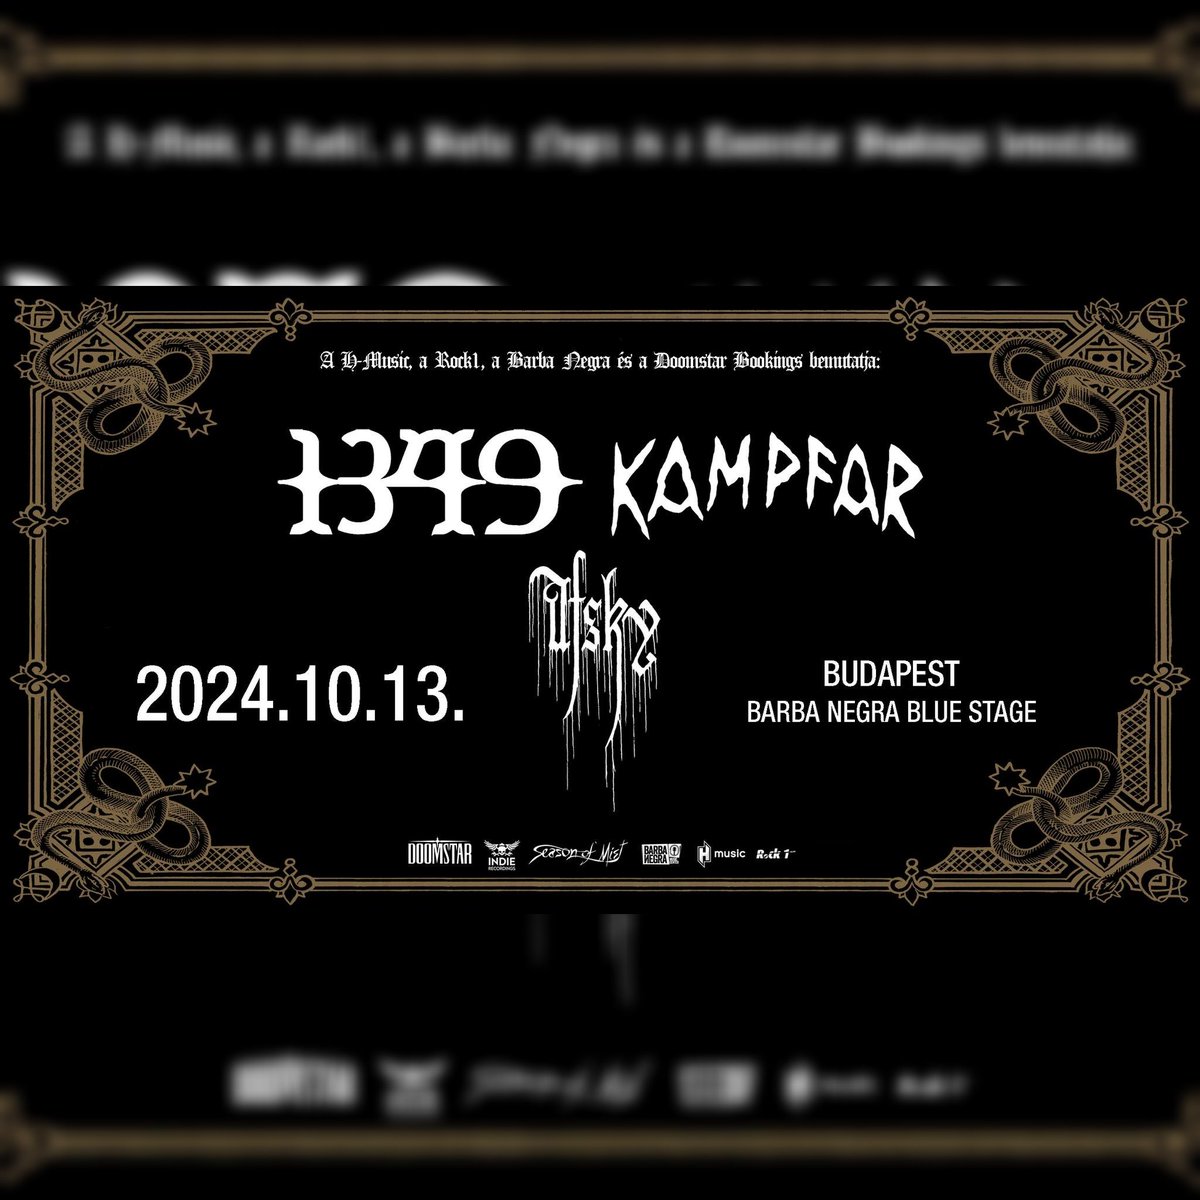 AURAL HELLFIRE ARRIVES IN BUDAPEST ON OCTOBER 13TH. @1349official and @Norsepagans, along with @afskyofficial, continue their European Tour at the @BarbaNegraBP Blue Stage on October 13th. Tickets: jegy.rock1.hu/1349-kampfar_2… DO NOT MISS IT.